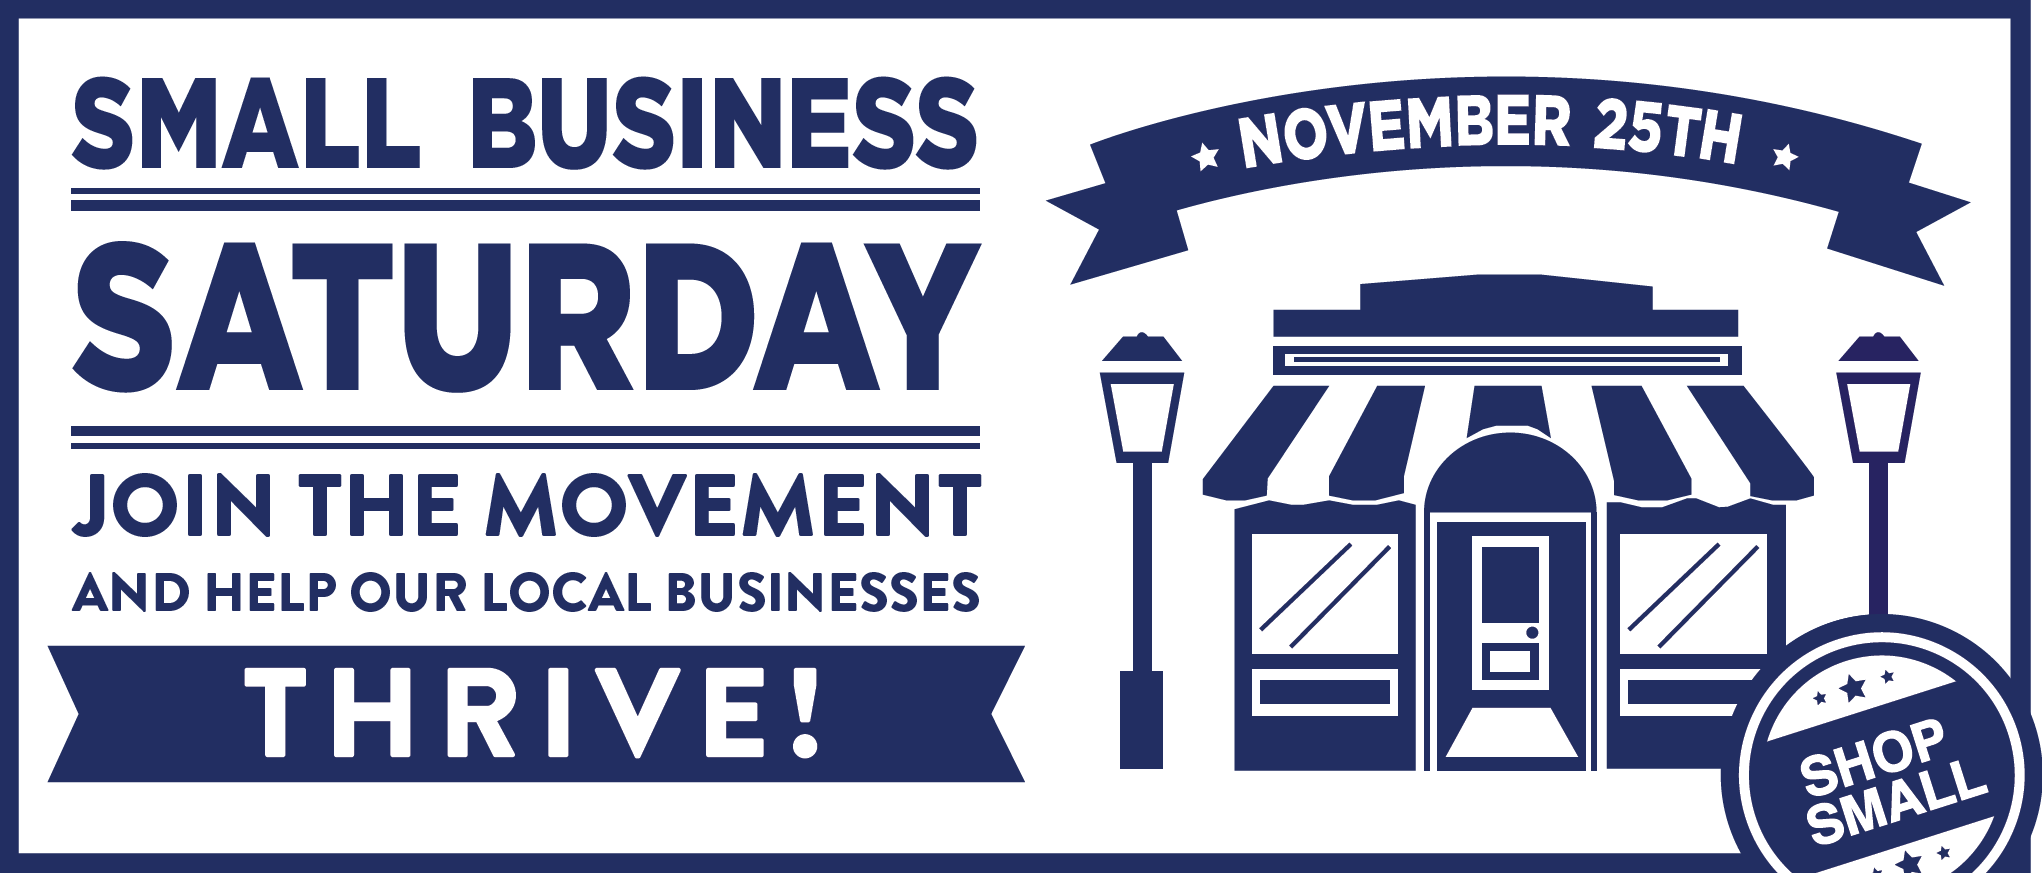 Shop Small Logo - Small Business Saturday November 25th - Burlingame Chamber of Commerce